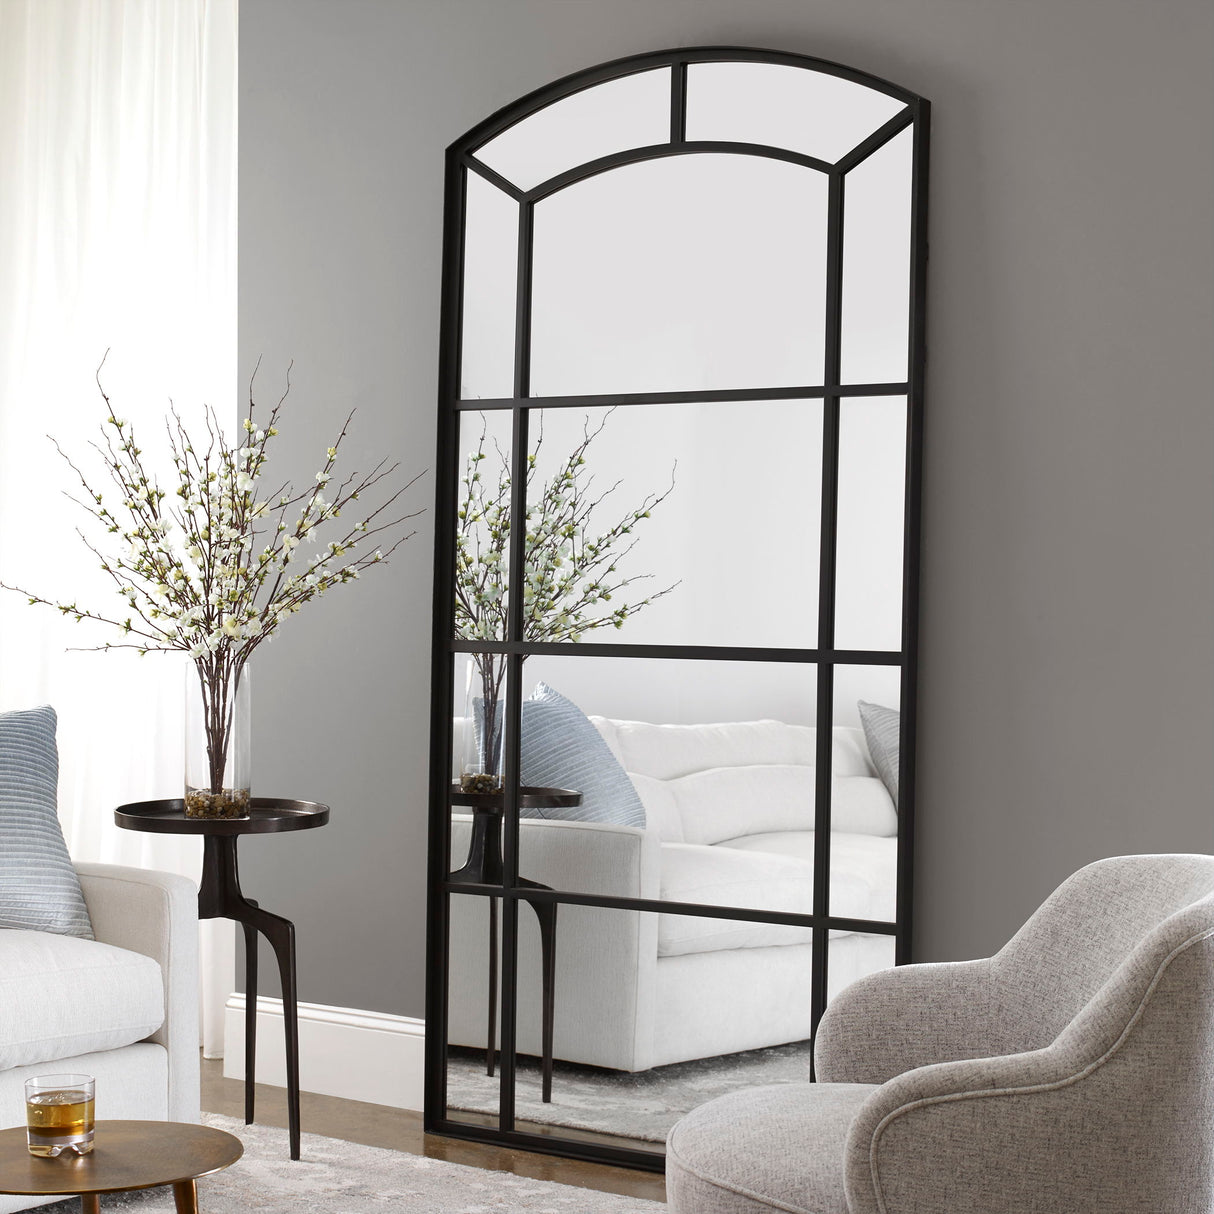 Camber - Oversized Arch Mirror - Black